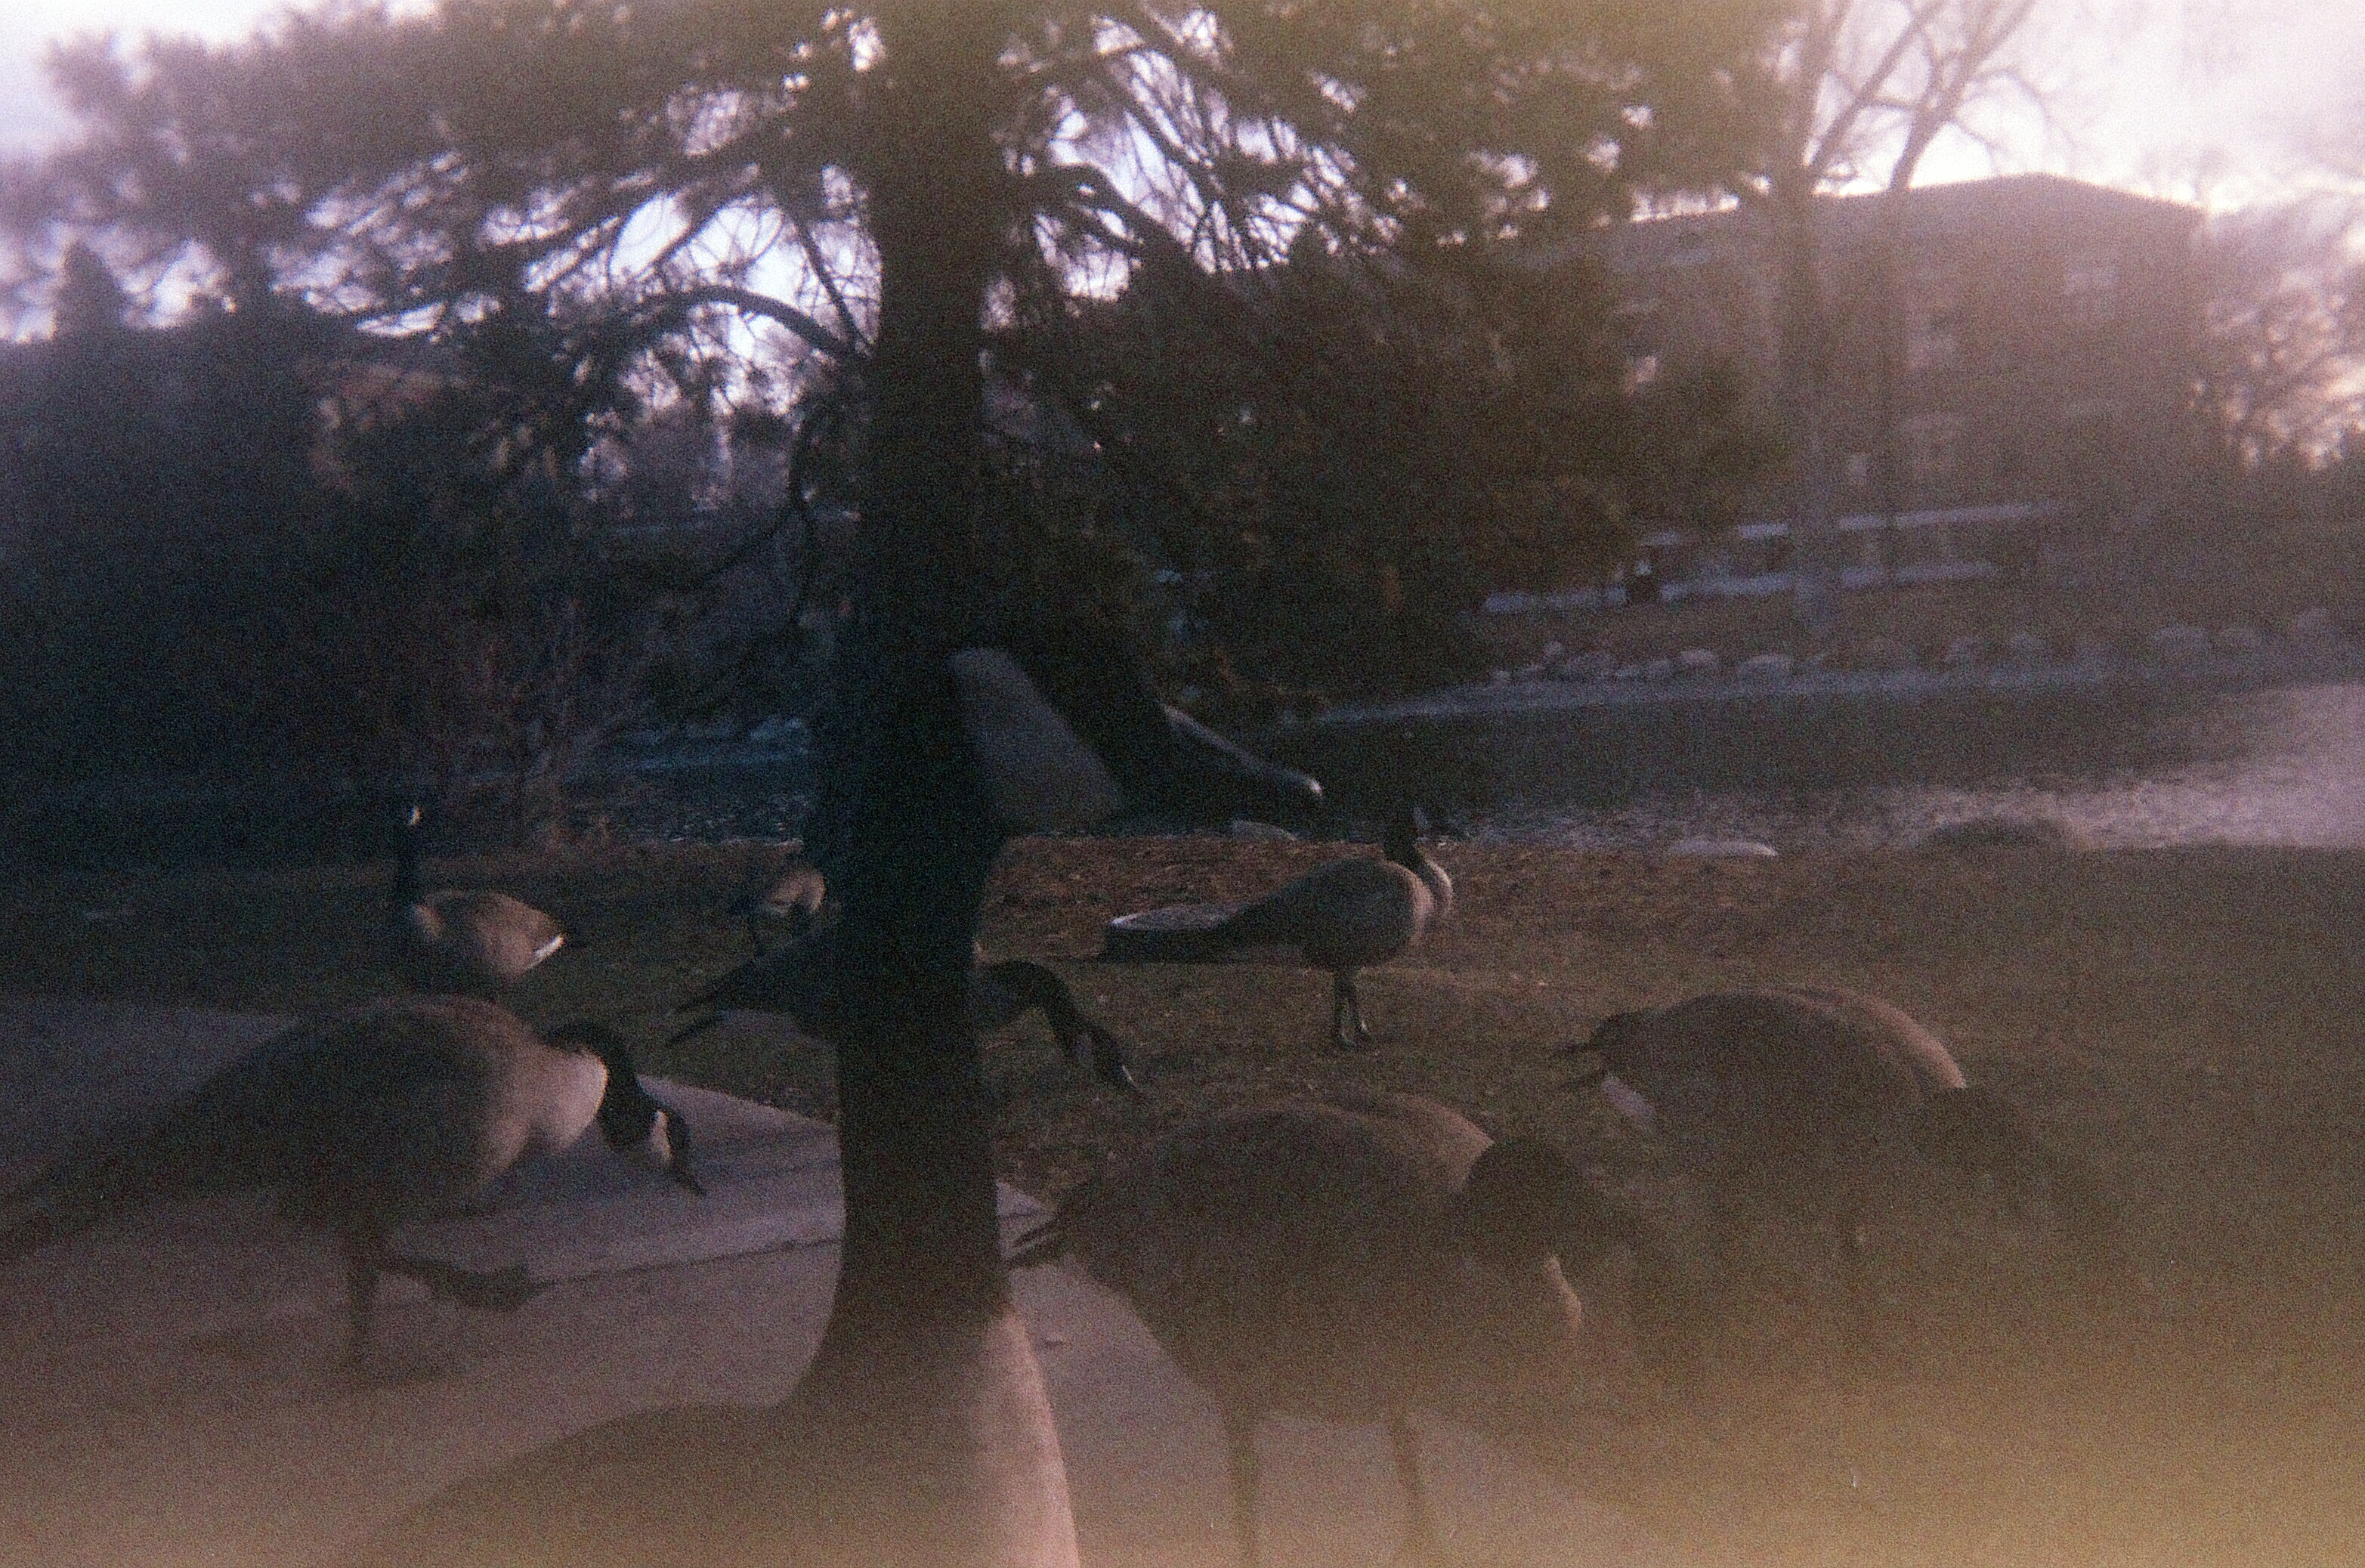 Several geese stand around one goose in center frame looking to the right. The photo is dim and foggy due to film ageing.